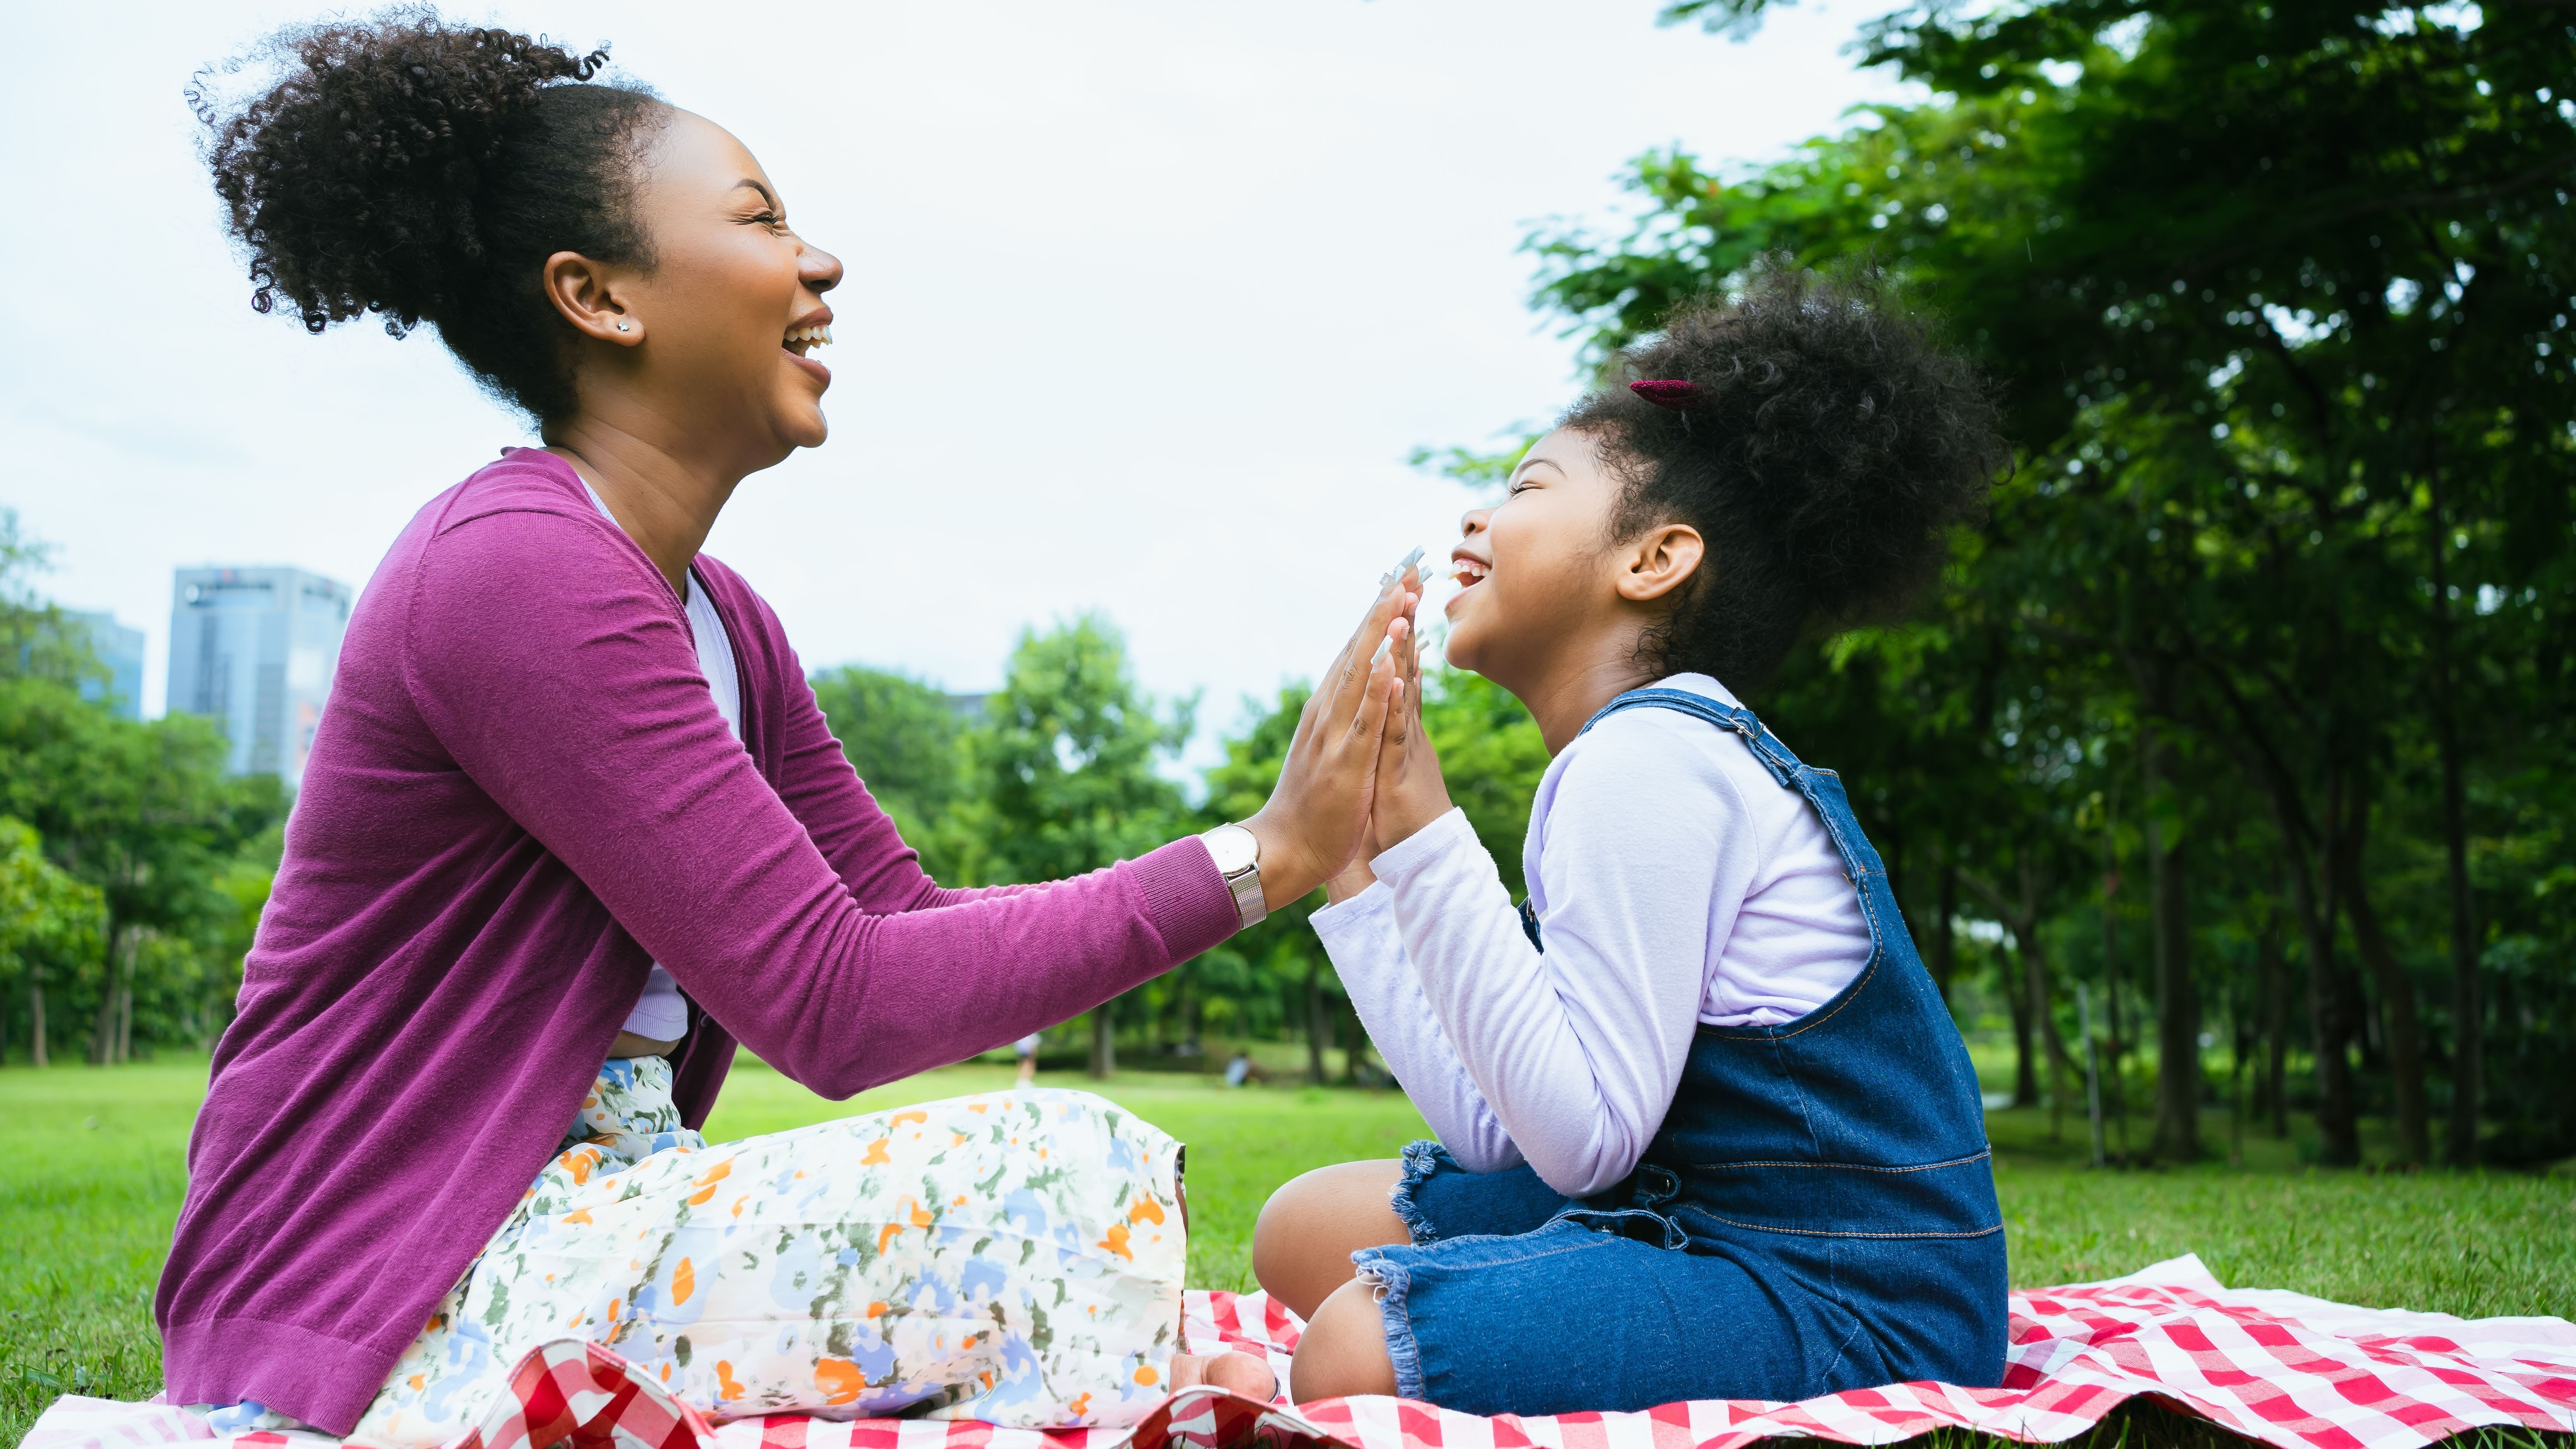 Picnic - mother and daughter facing each other and smiling